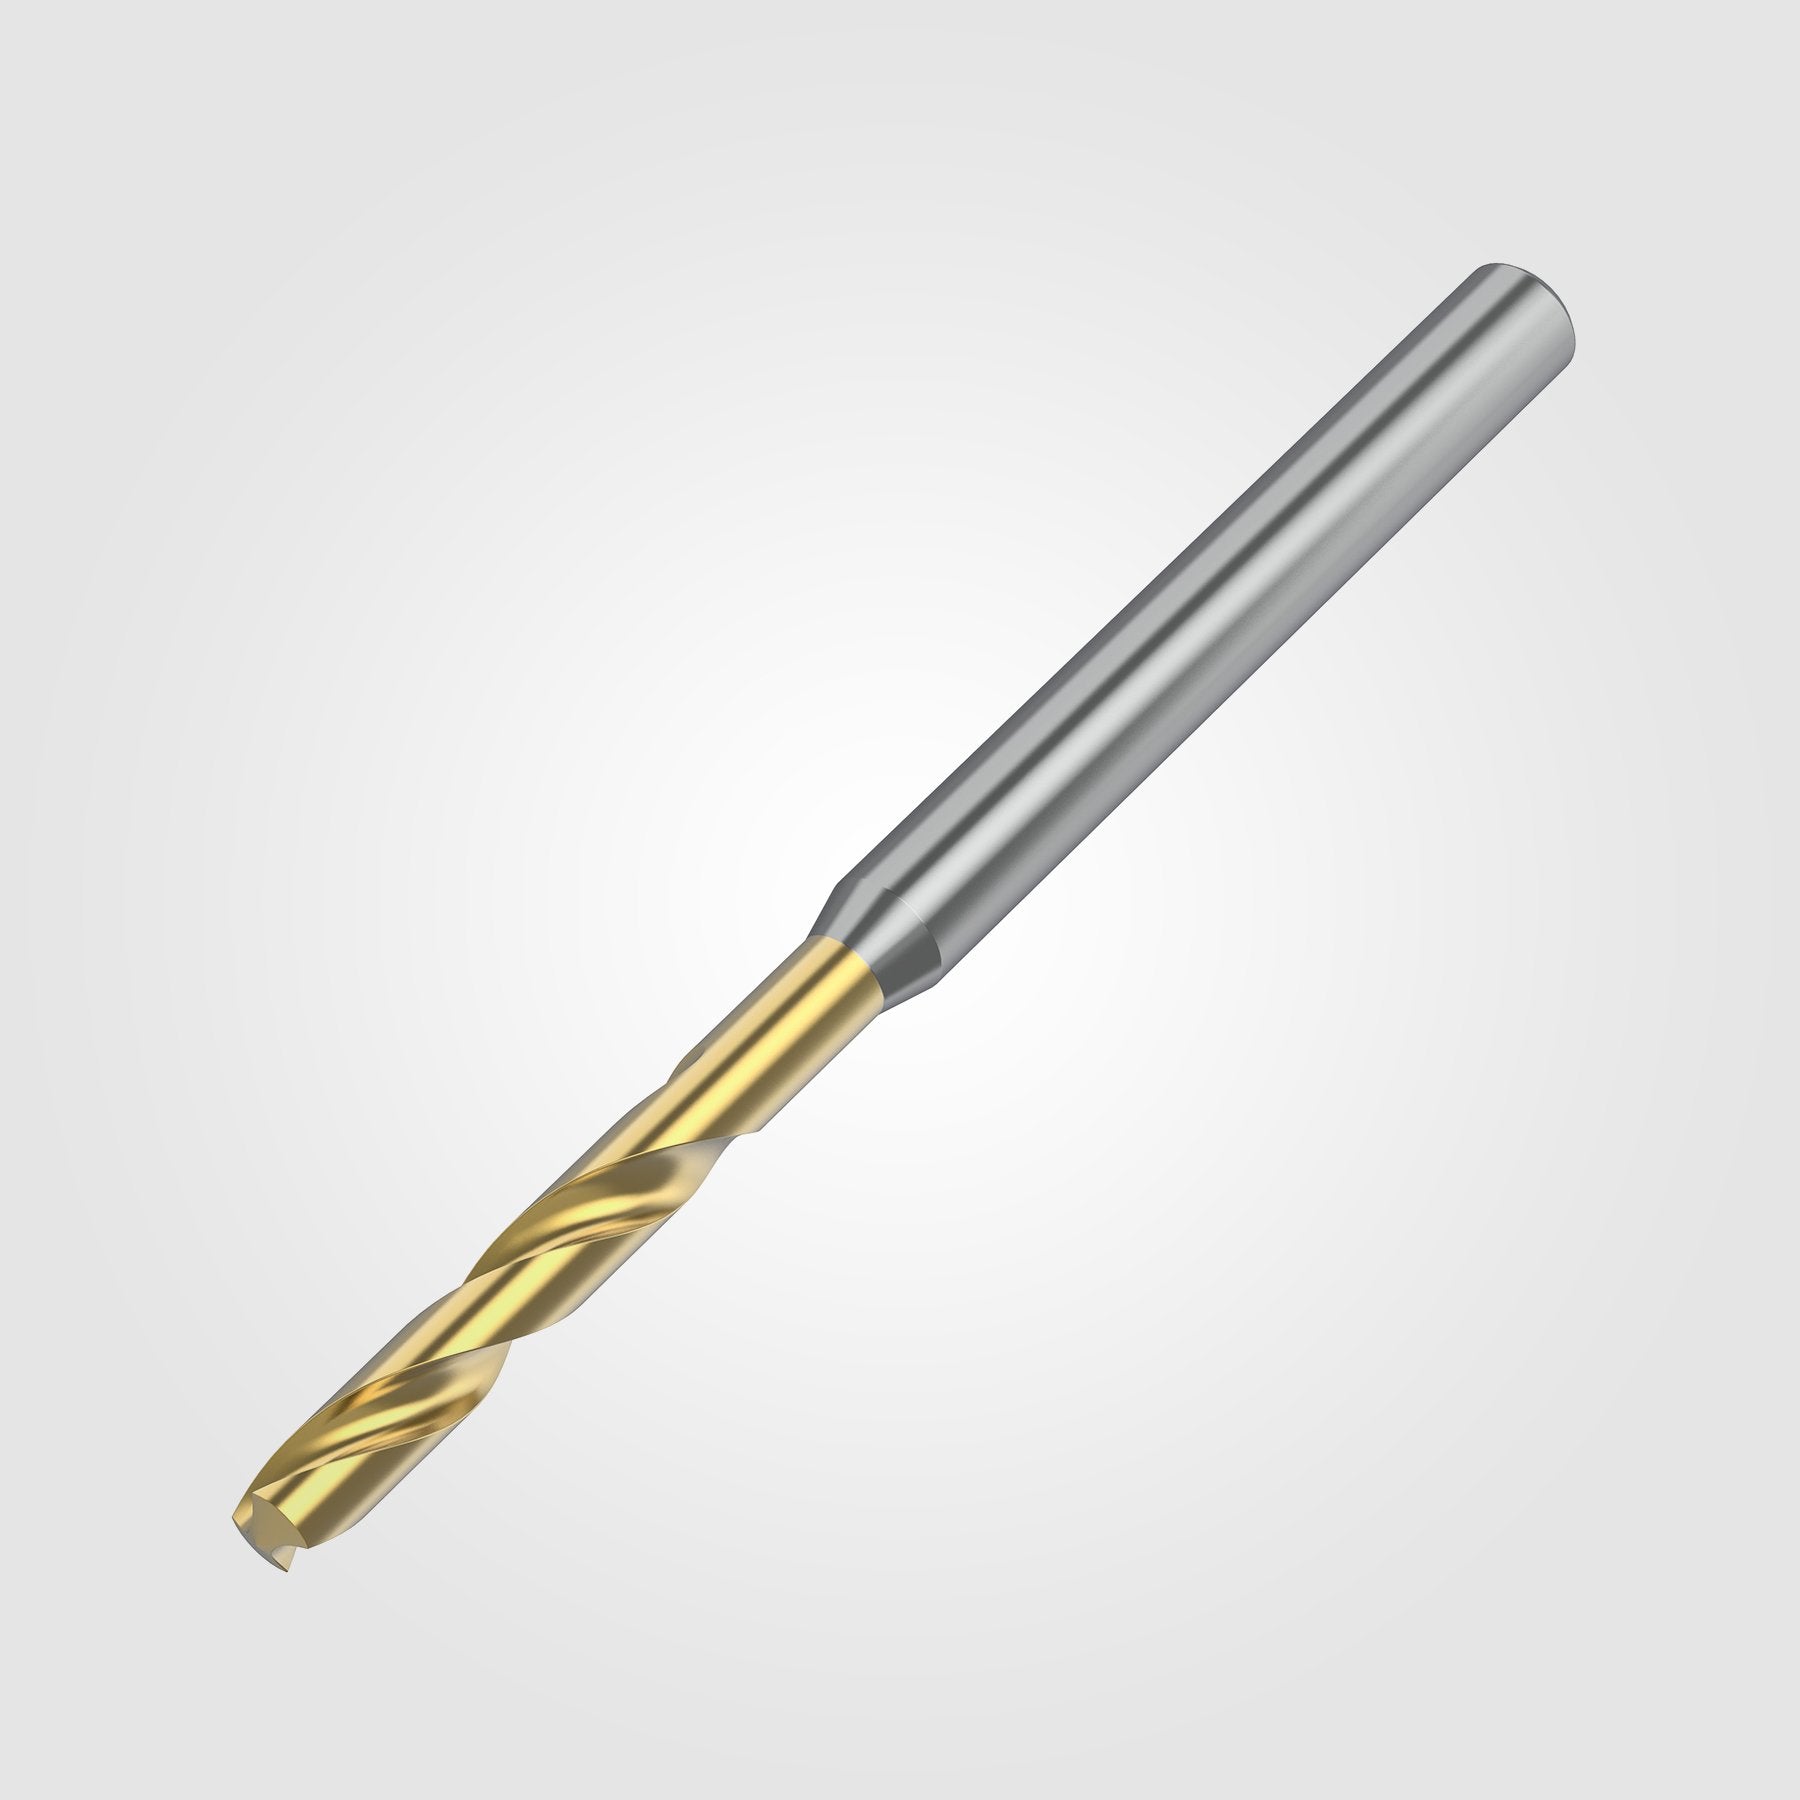 GOdrill (THROUGH COOLANT) | 5.1mm / .2008" / 3xD | SOLID CARBIDE DRILL | 4151135